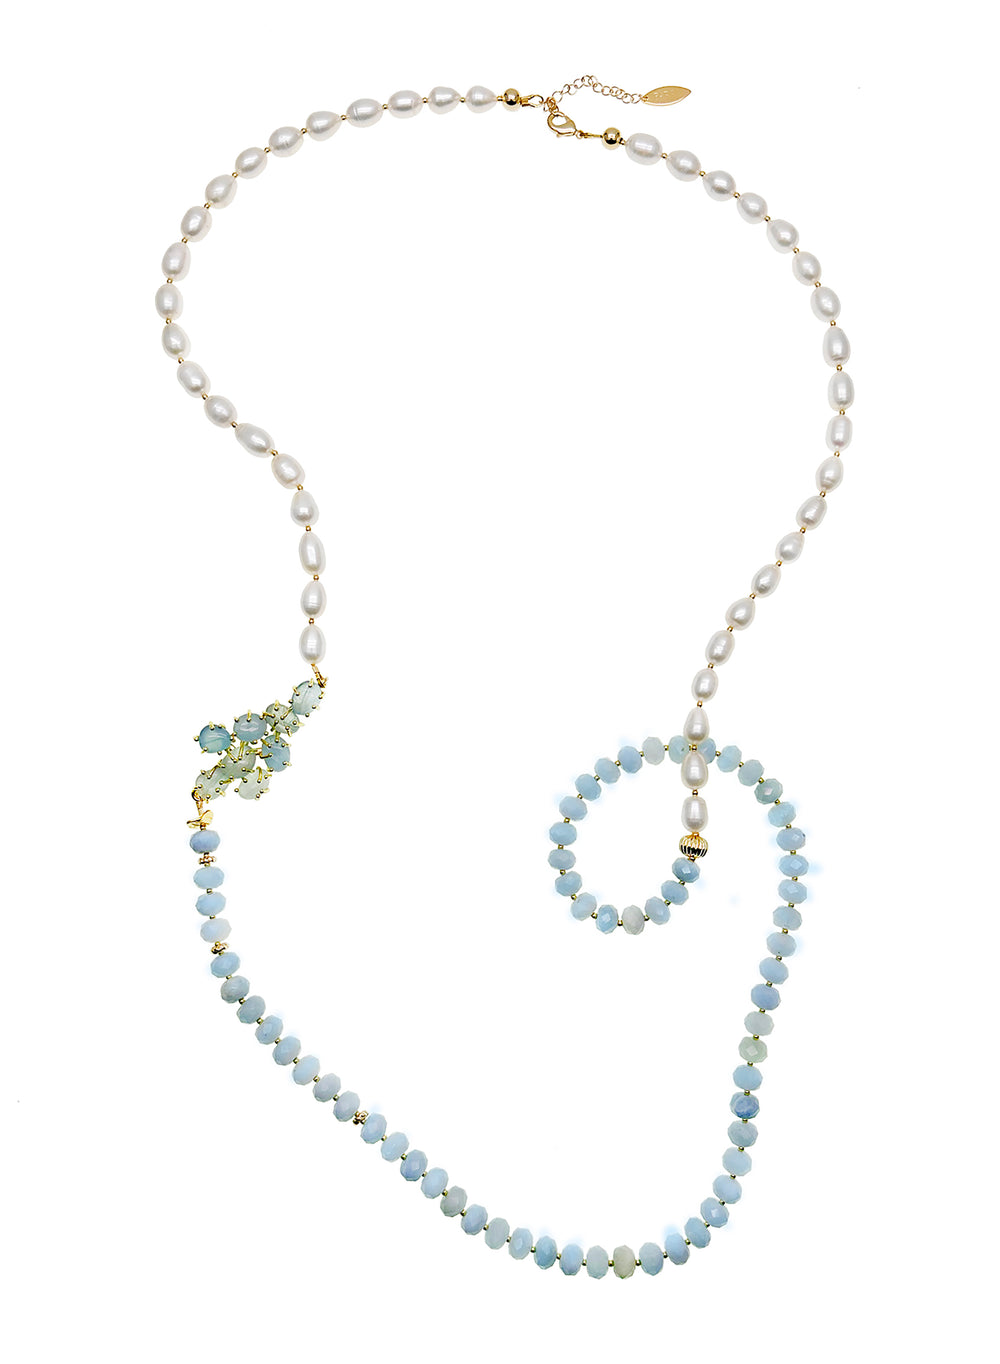 Blue Aquamarine and Freshwater Pearls Long Necklace JN044 - FARRA